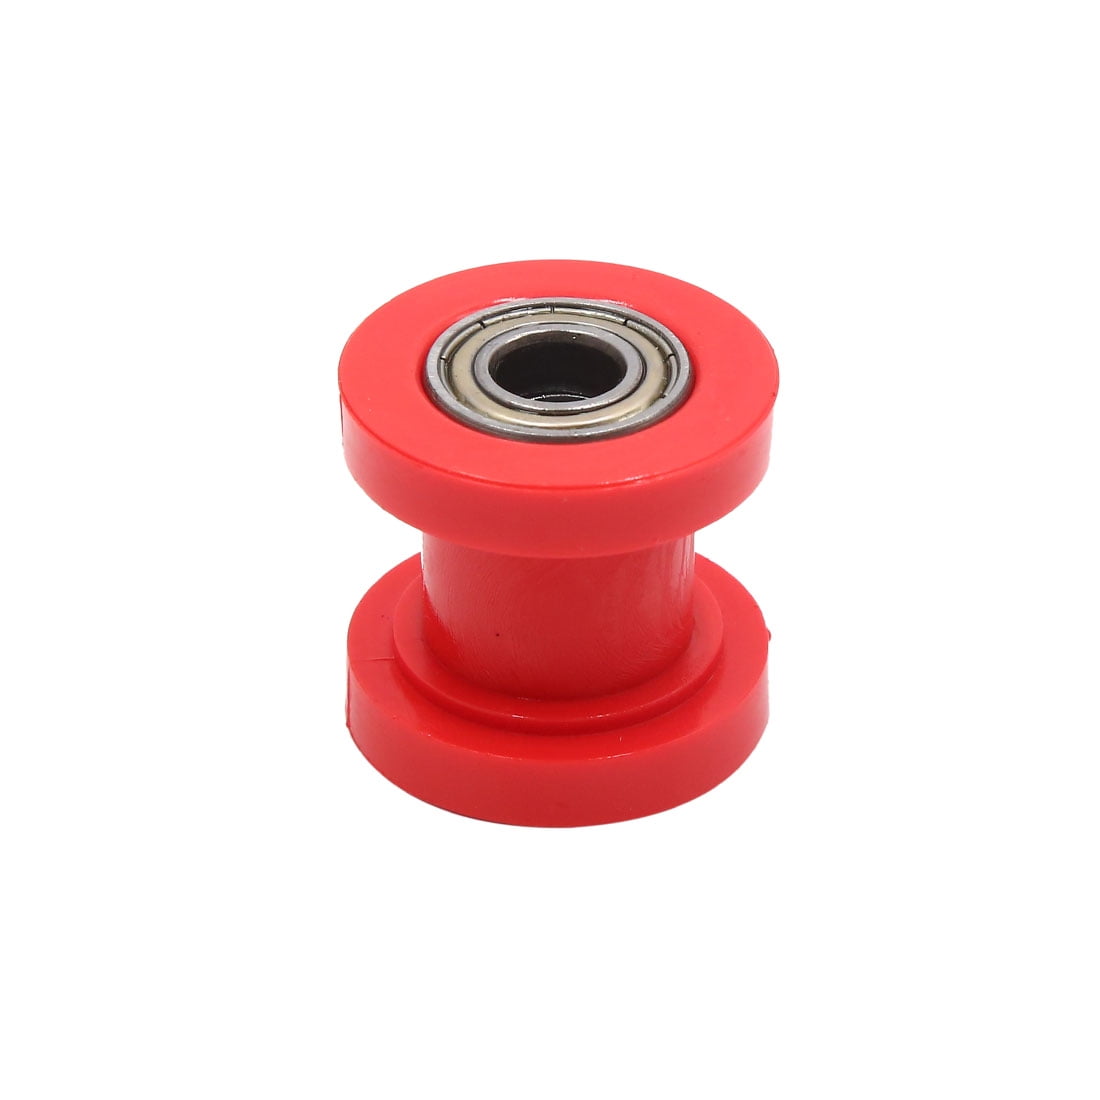 NEW RED SPARE PIT BIKE CHAIN ROLLER TENSIONER 10MM HOLE FITTING QUAD ATV